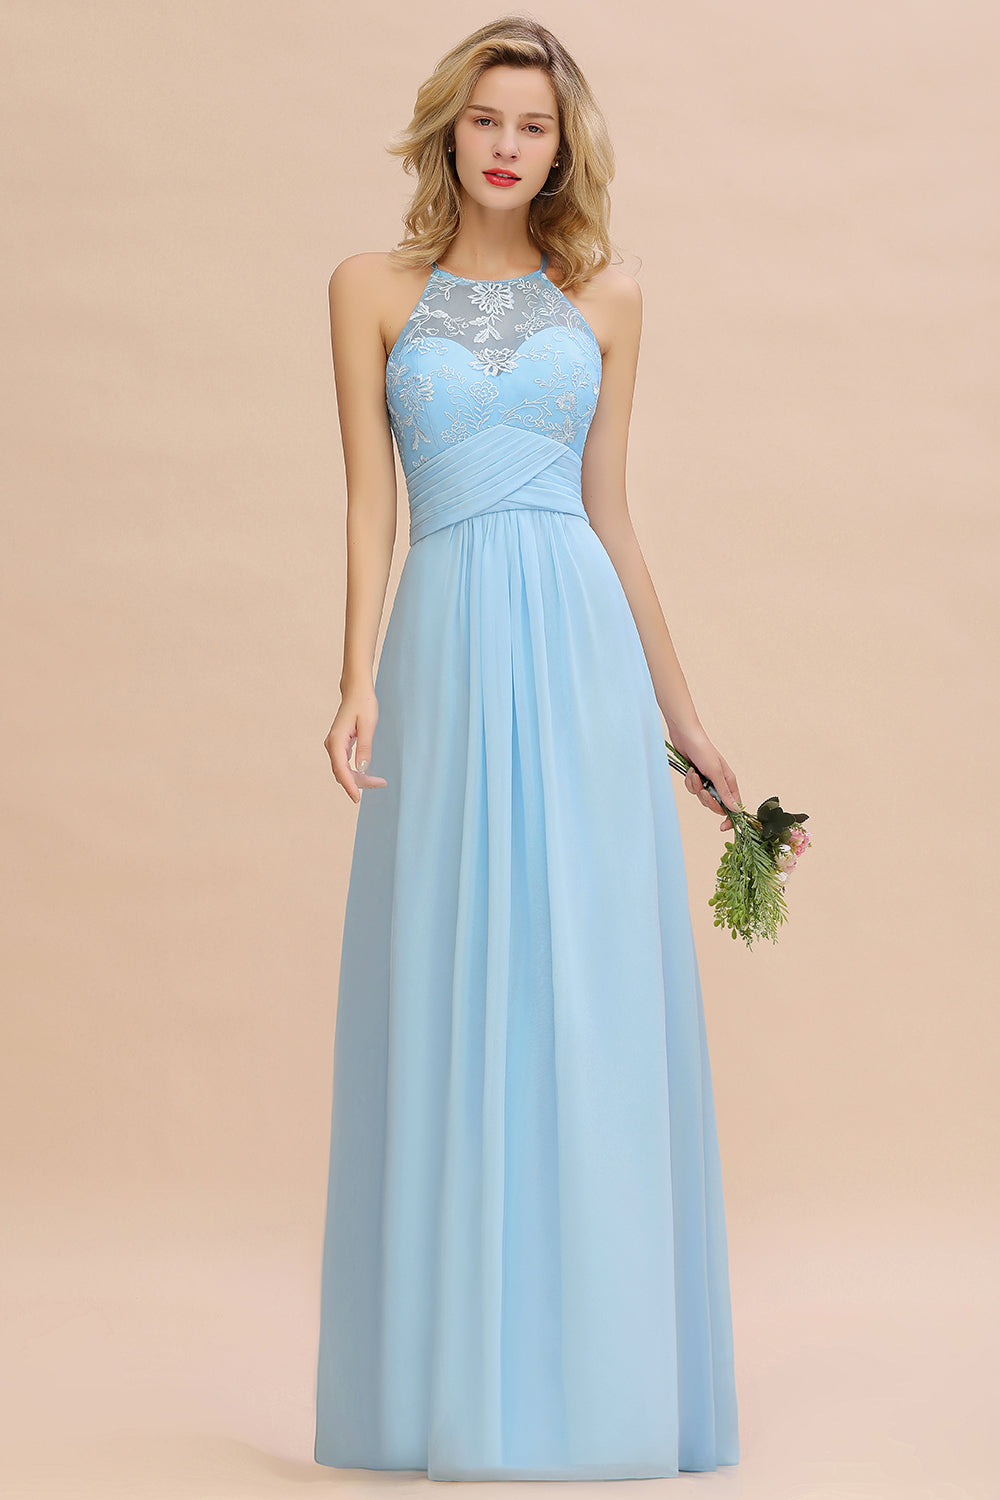 Load image into Gallery viewer, Elegant Jewel Ruffle Affordable Chiffon Bridesmaid Dress with Appliques-27dress
